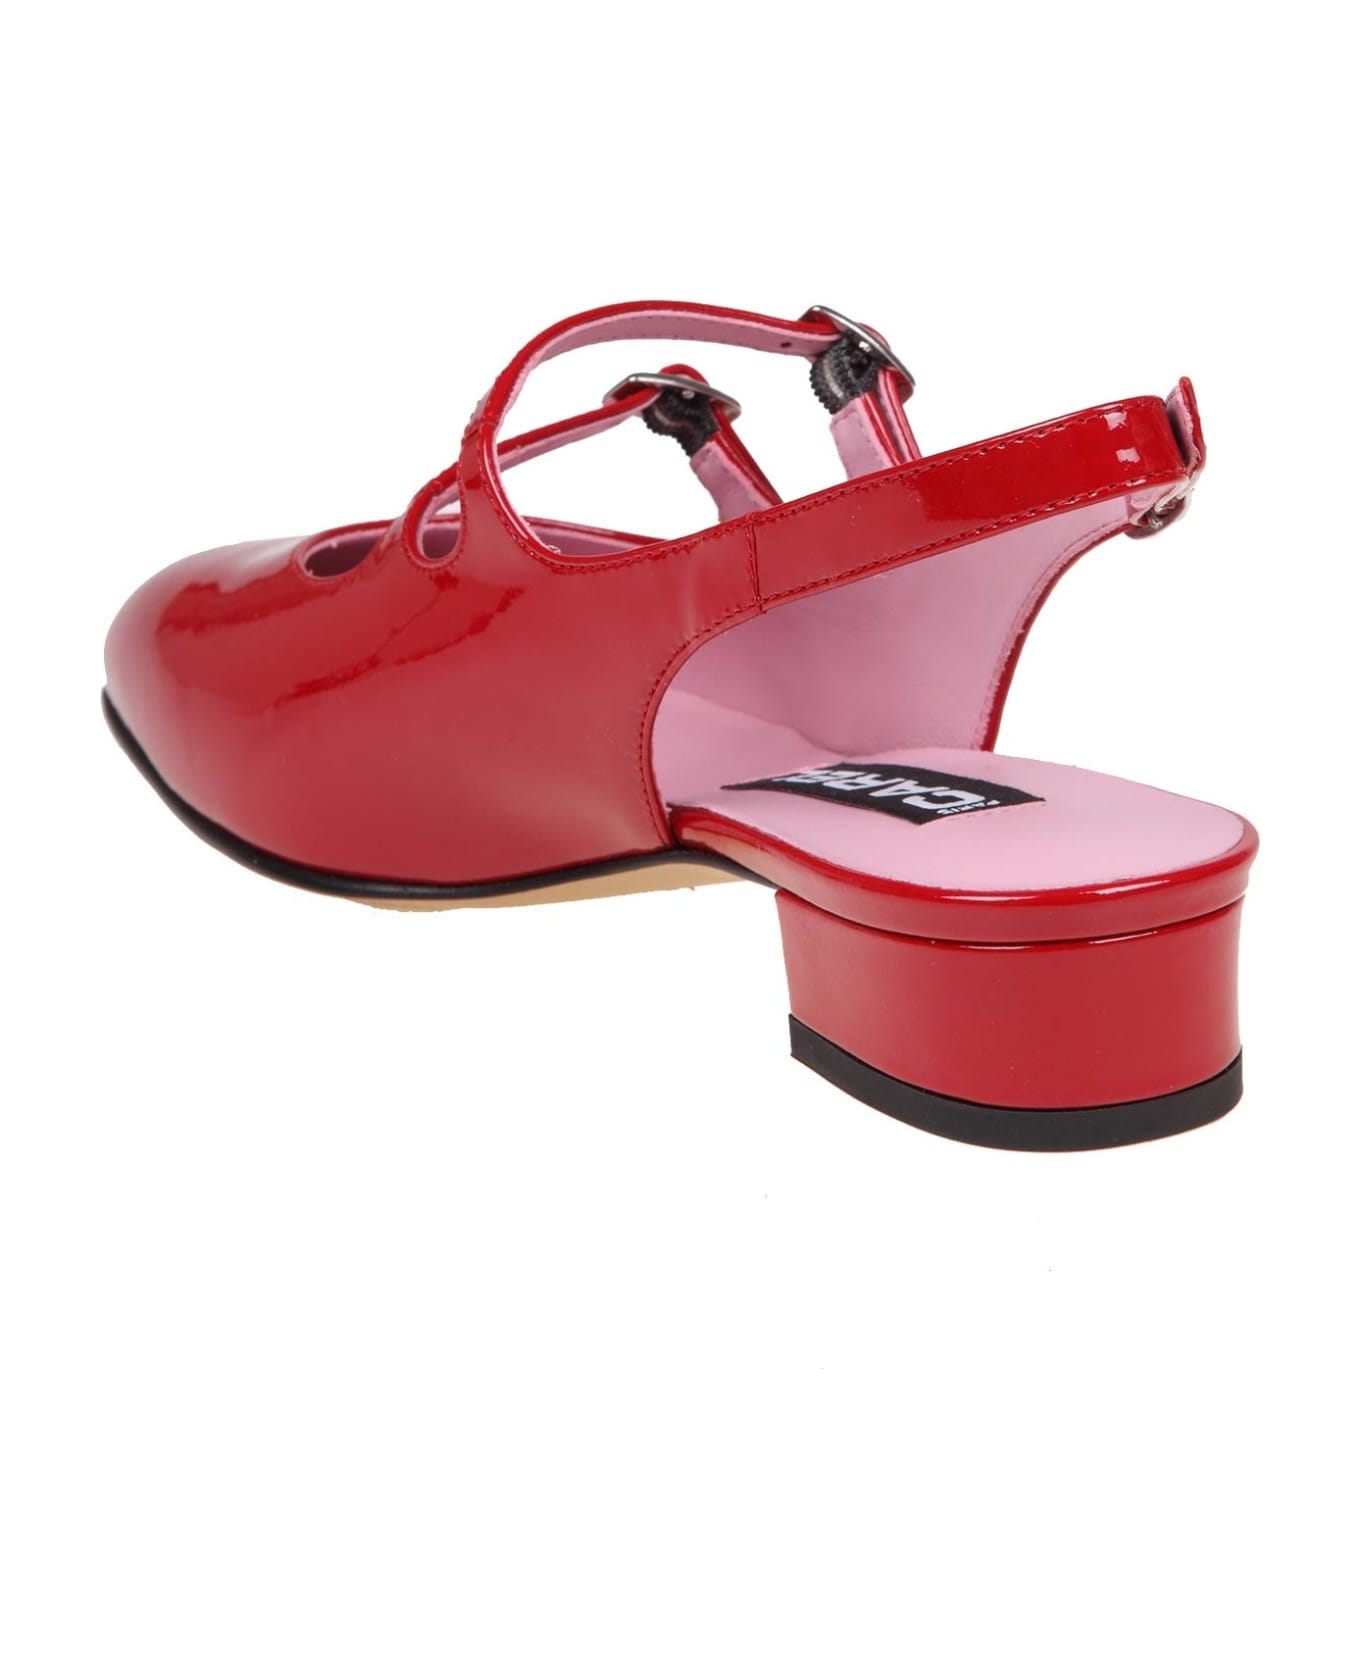 Carel Slingback In Red Patent Leather - Rouge